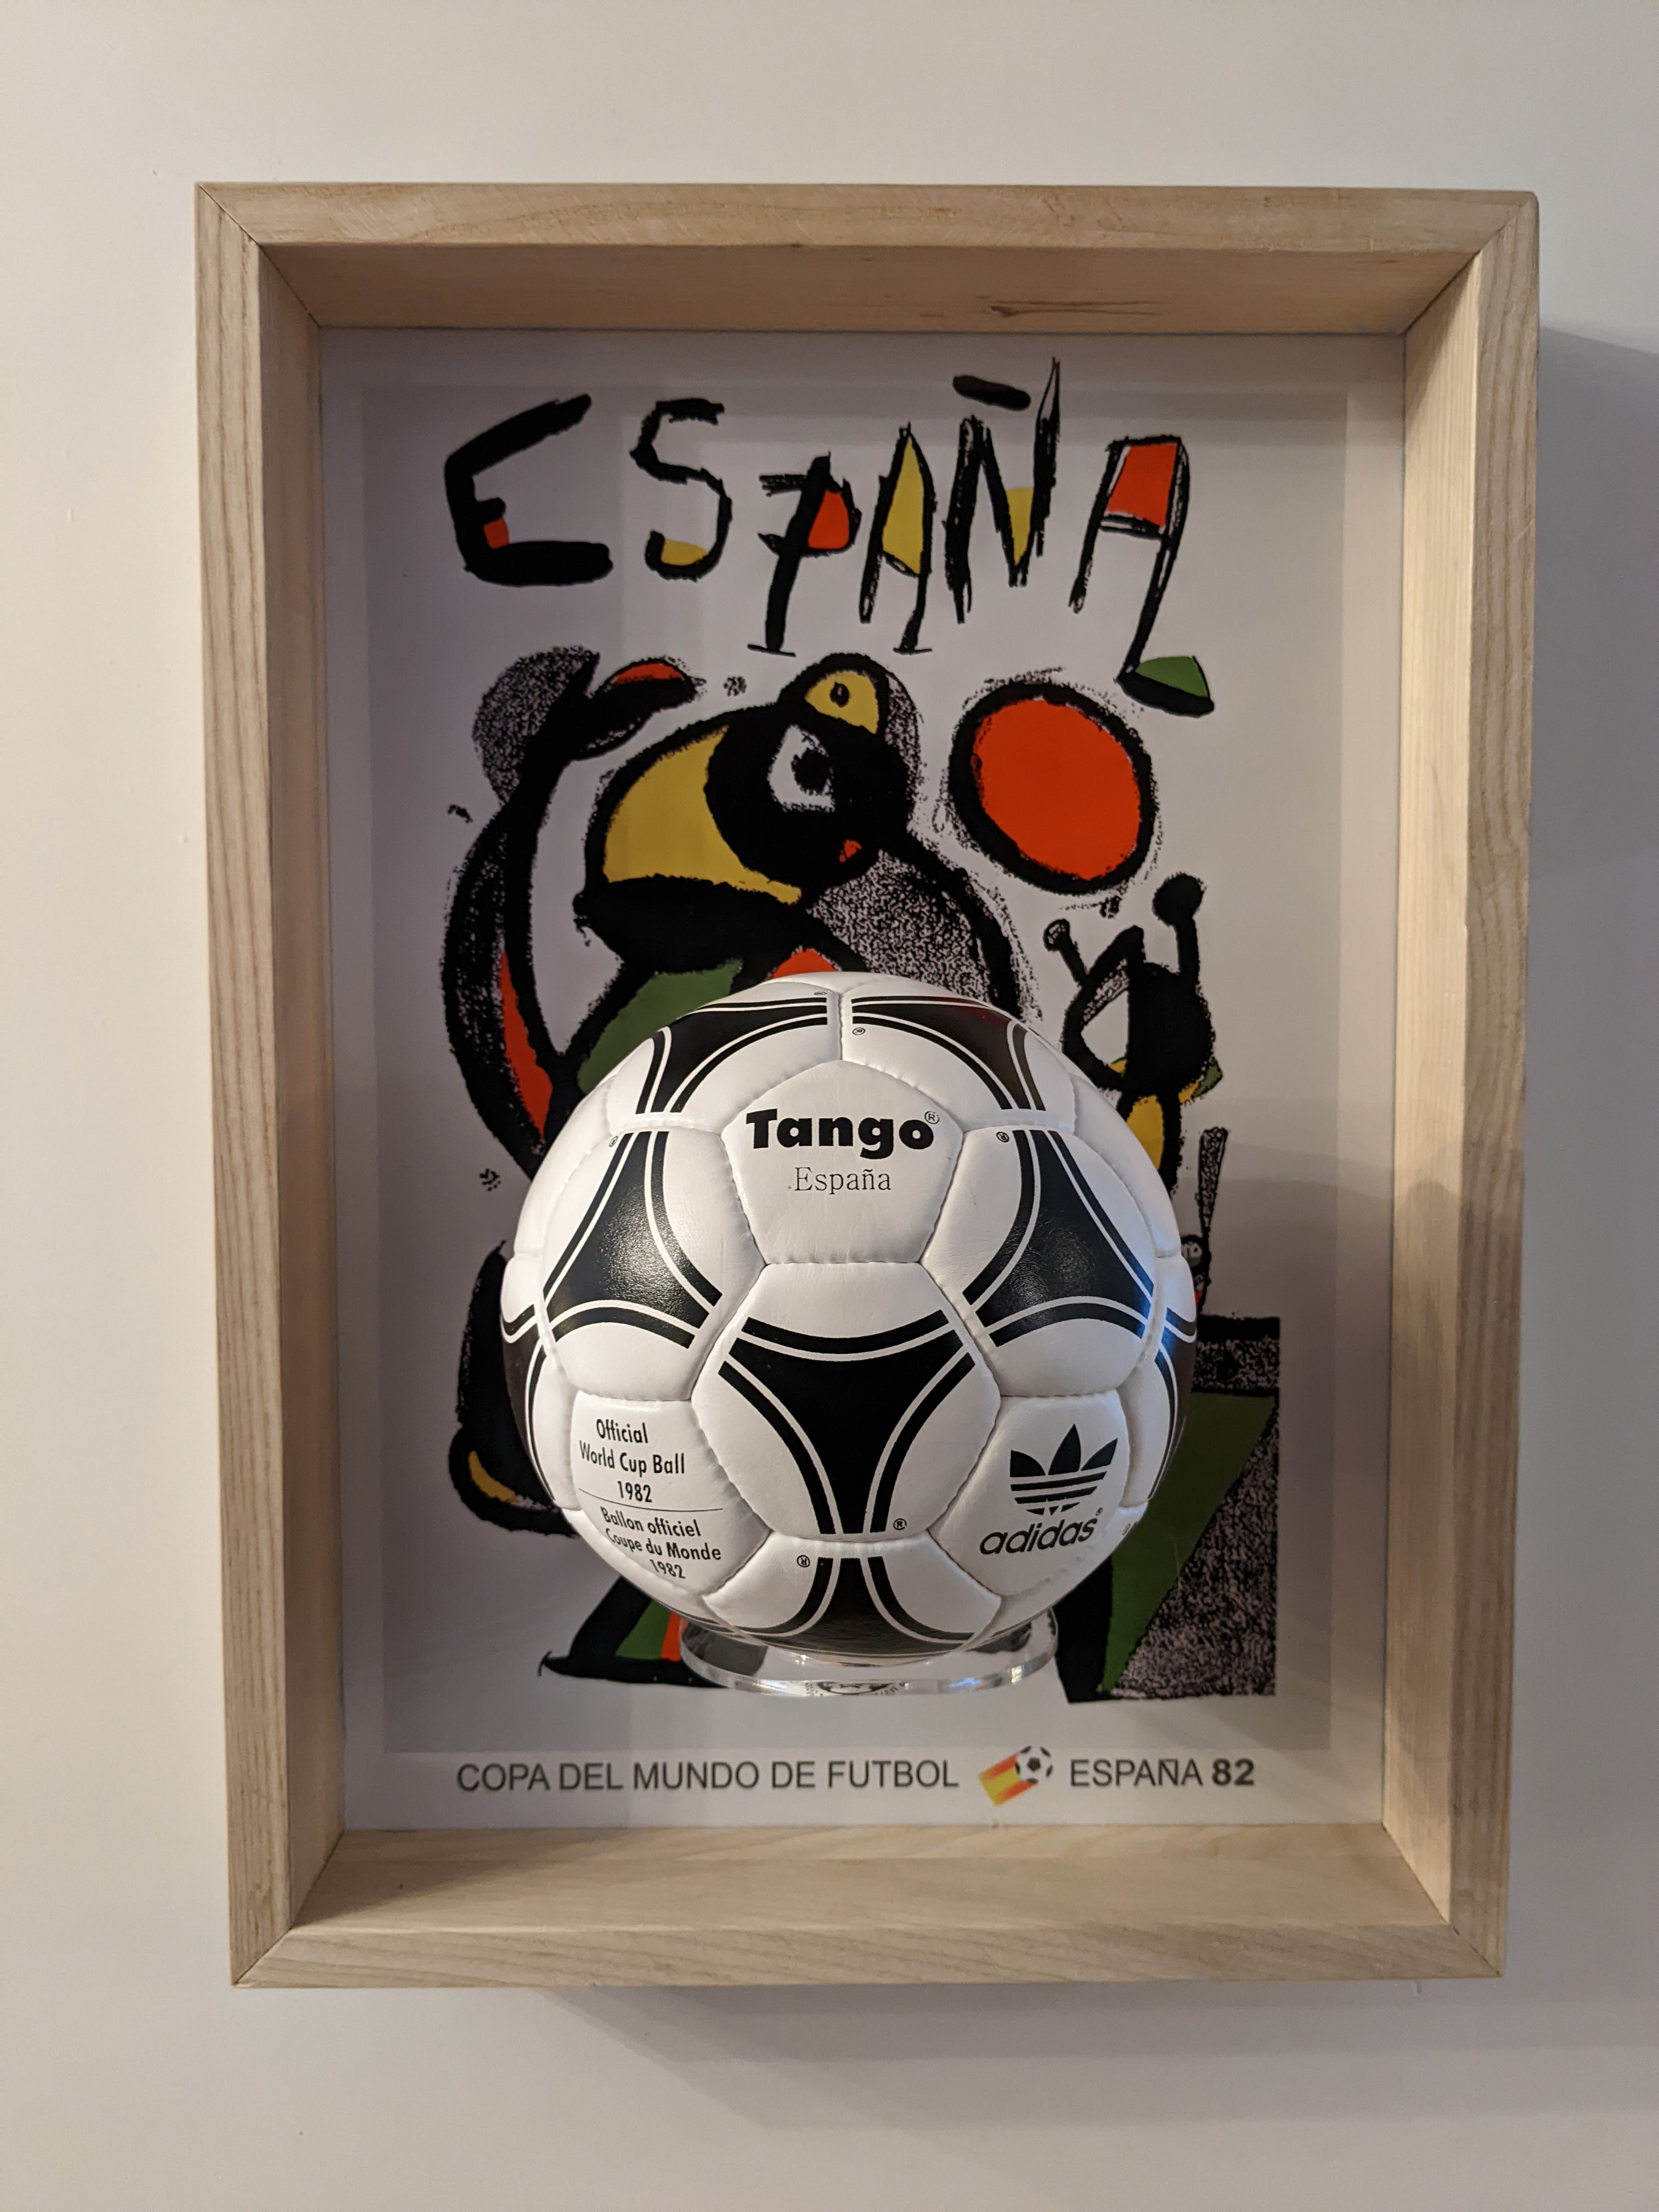 Geometría Esmerado Silicio Matchball Displays on Twitter: "12/22 Spain 1982 Adidas Tango Espana Adidas  continued with the popular Tango here, renaming it to a tournament specific  name 'Espana' #worldcup #football https://t.co/vbLyehdby1" / Twitter